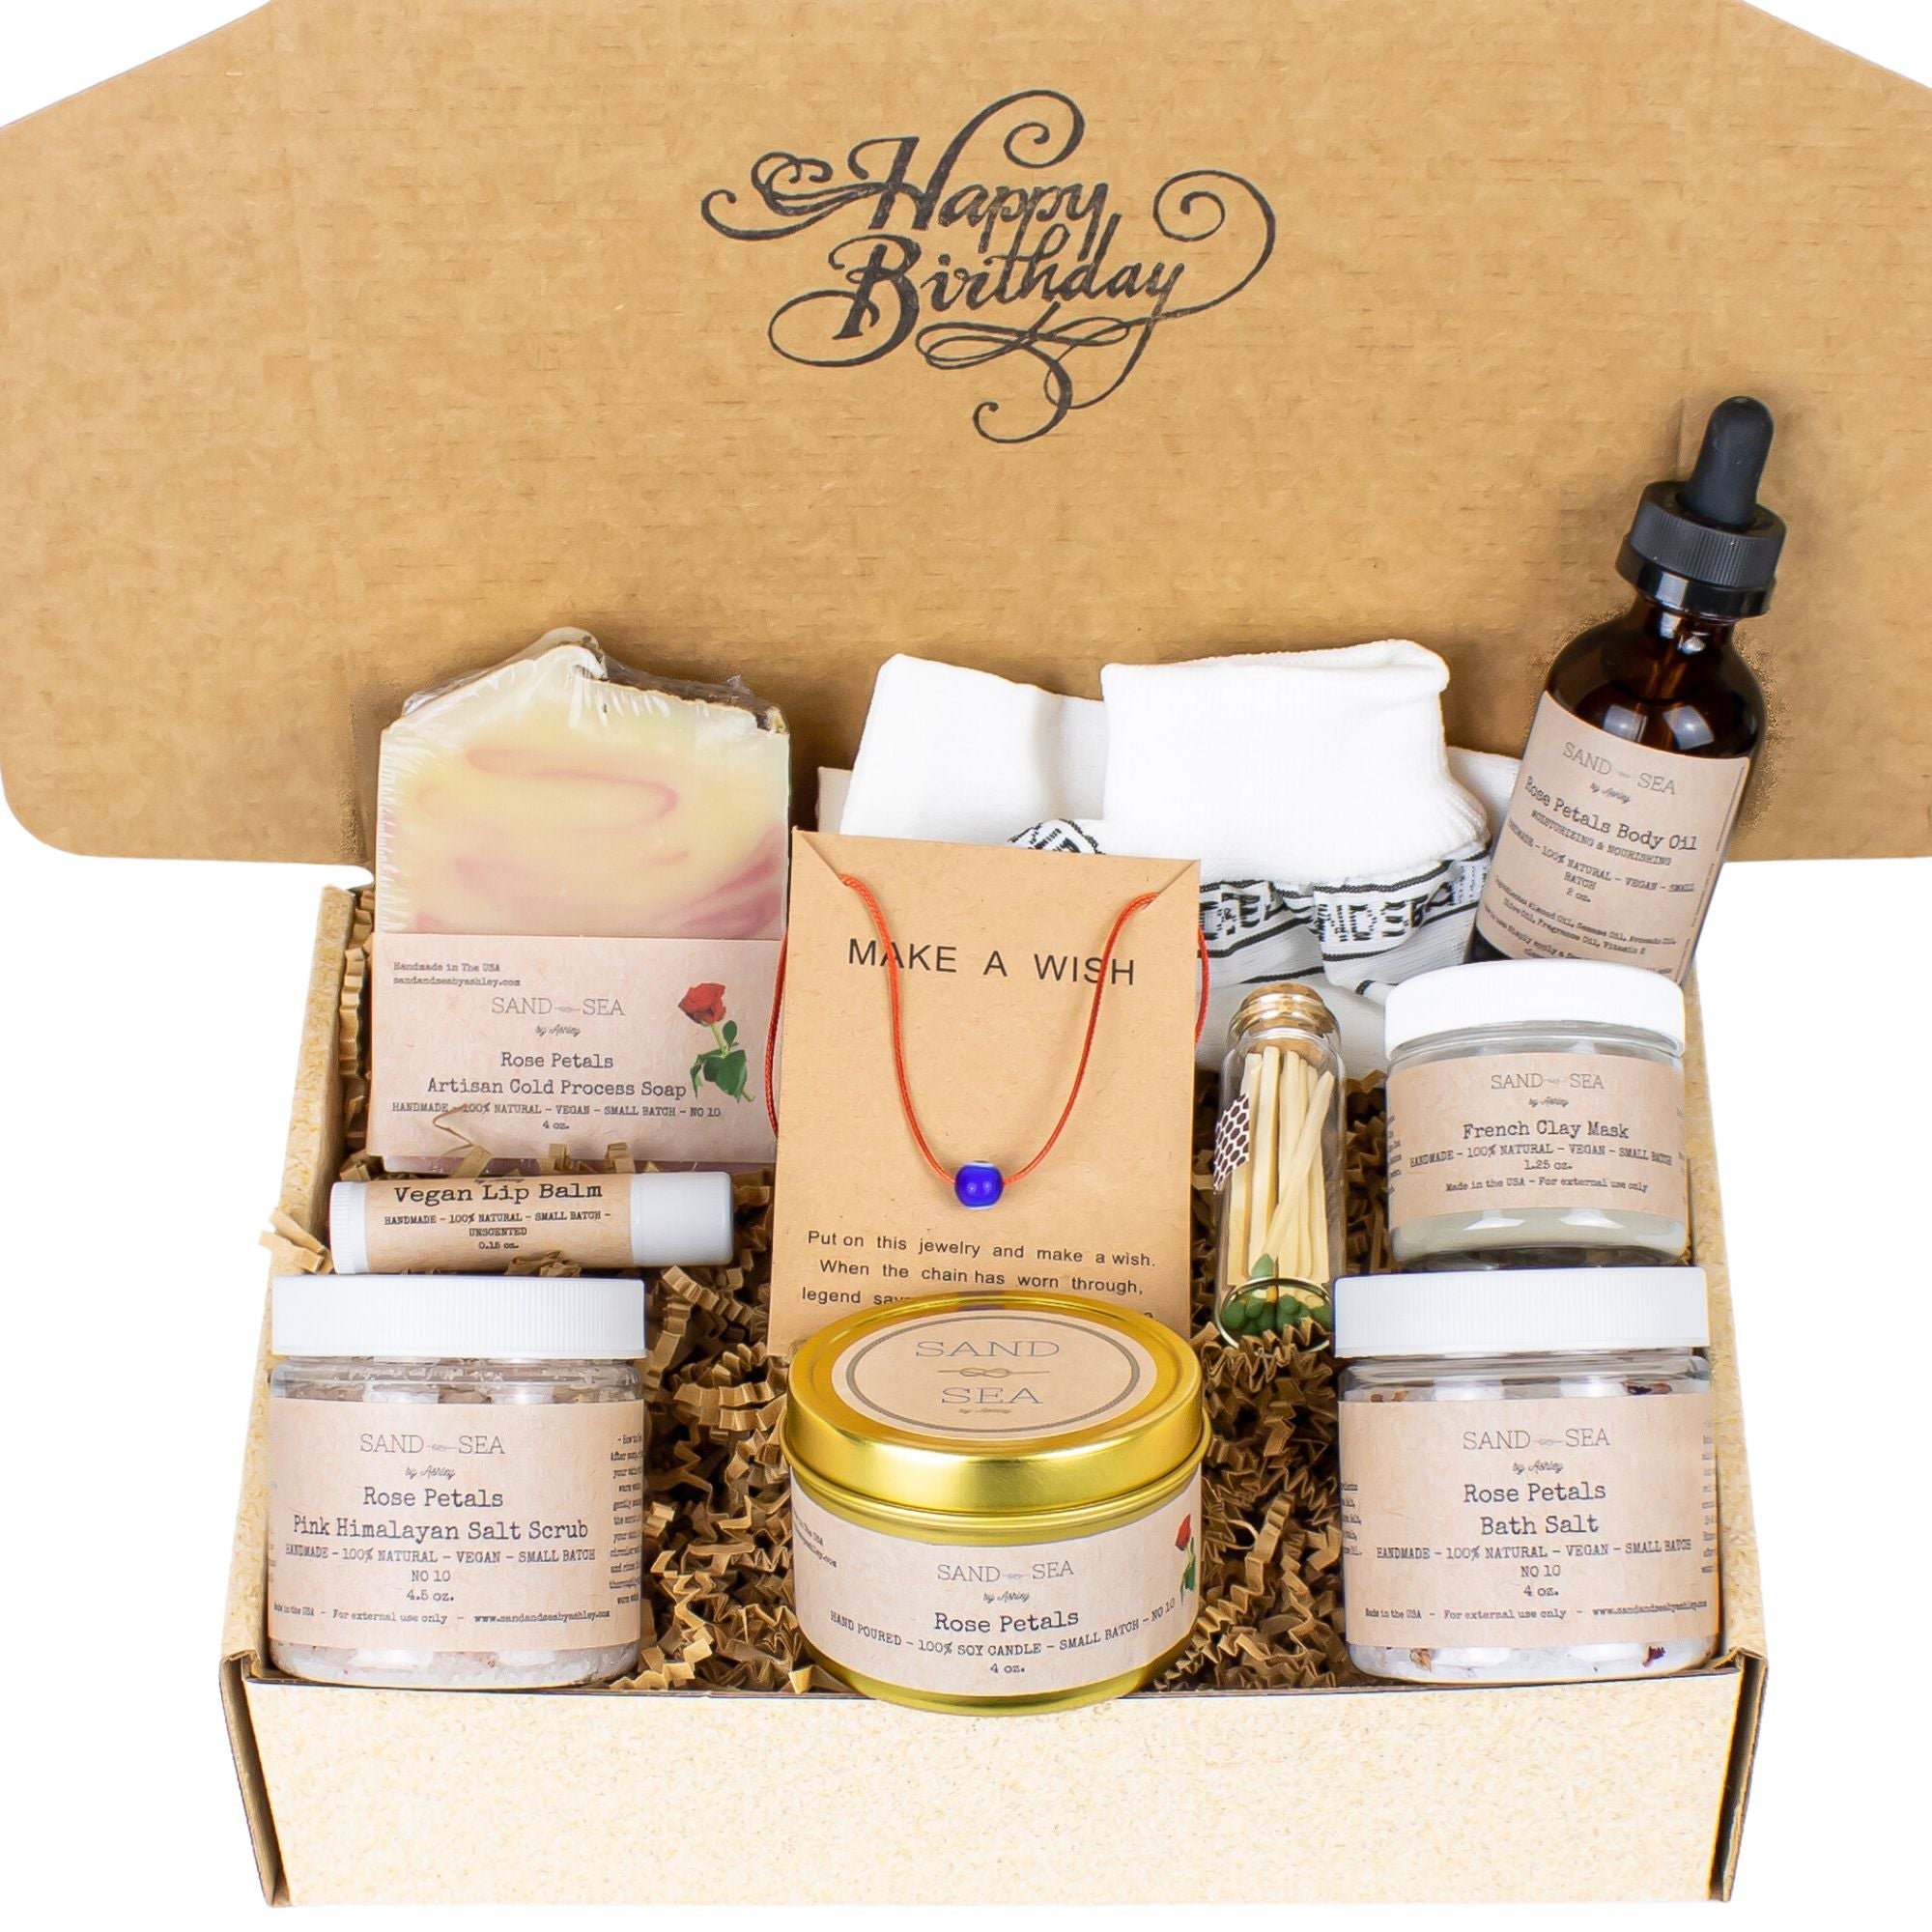 Spa Gift Baskets for Women in Vanilla Honey, Holiday Christmas Mothers Day  Gifts Idea - Sister Mom Wife, Happy Birthday Gifts For Women, Best  Friends Gifts for Women